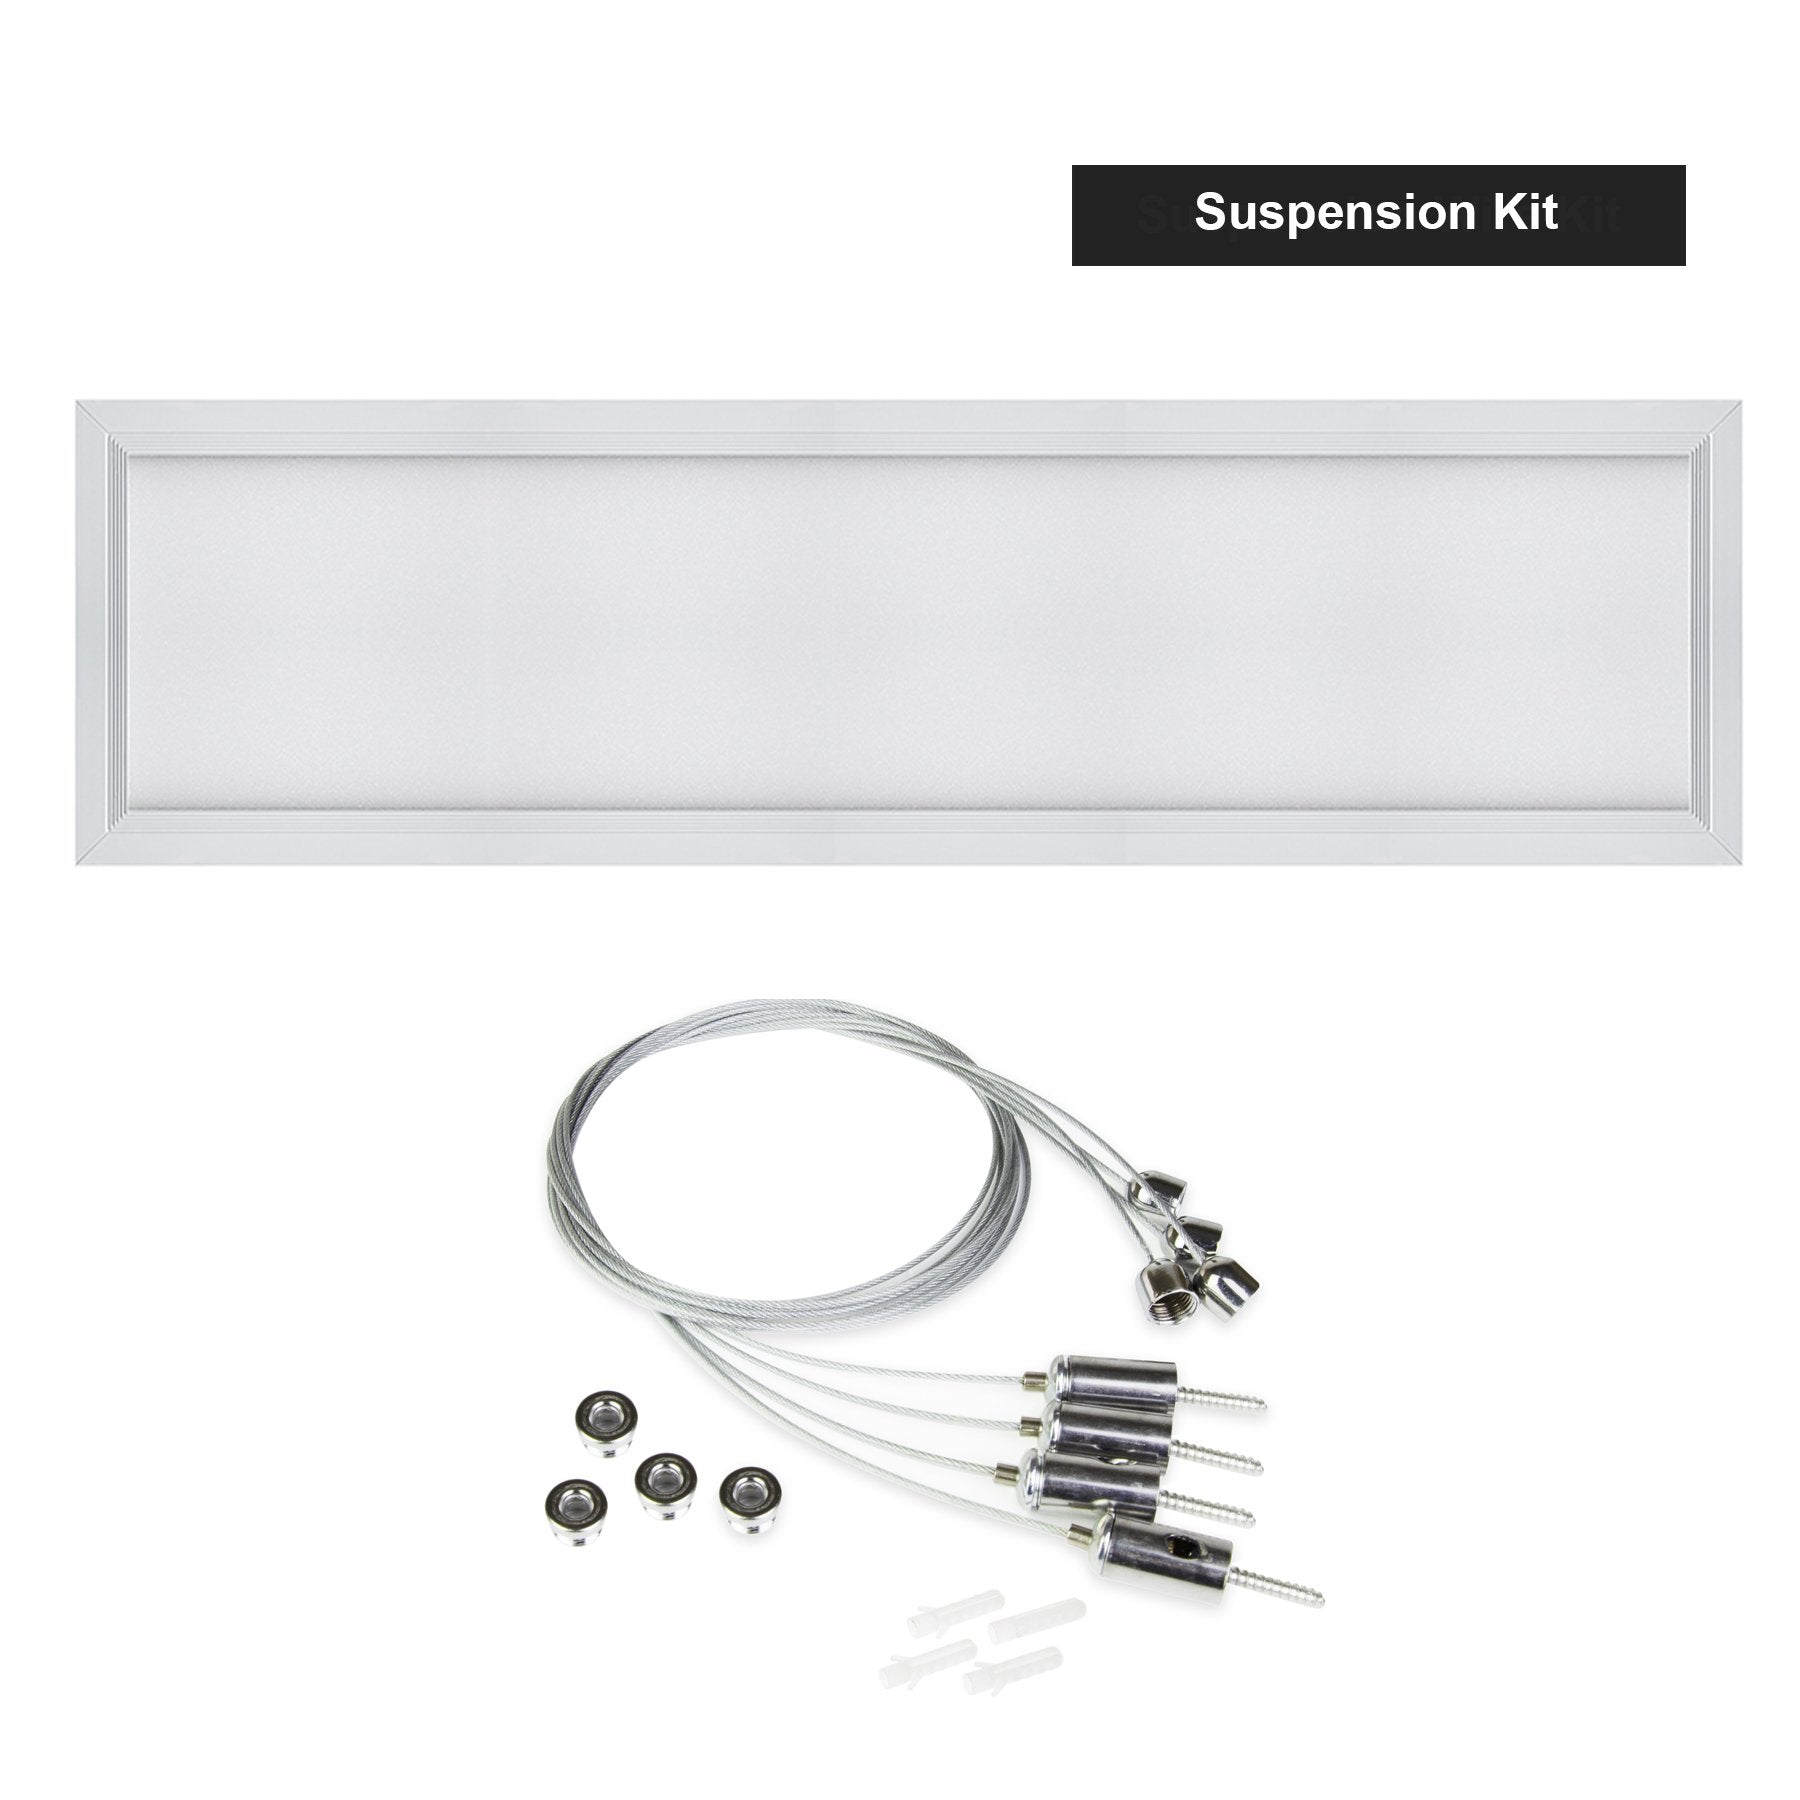 G.W.S LED Wholesale 1195x295mm LED Panel Lights Suspended (With Wire Kit) / Neutral White (4000K) / No 1195x295mm 42W White Frame LED Panel Light